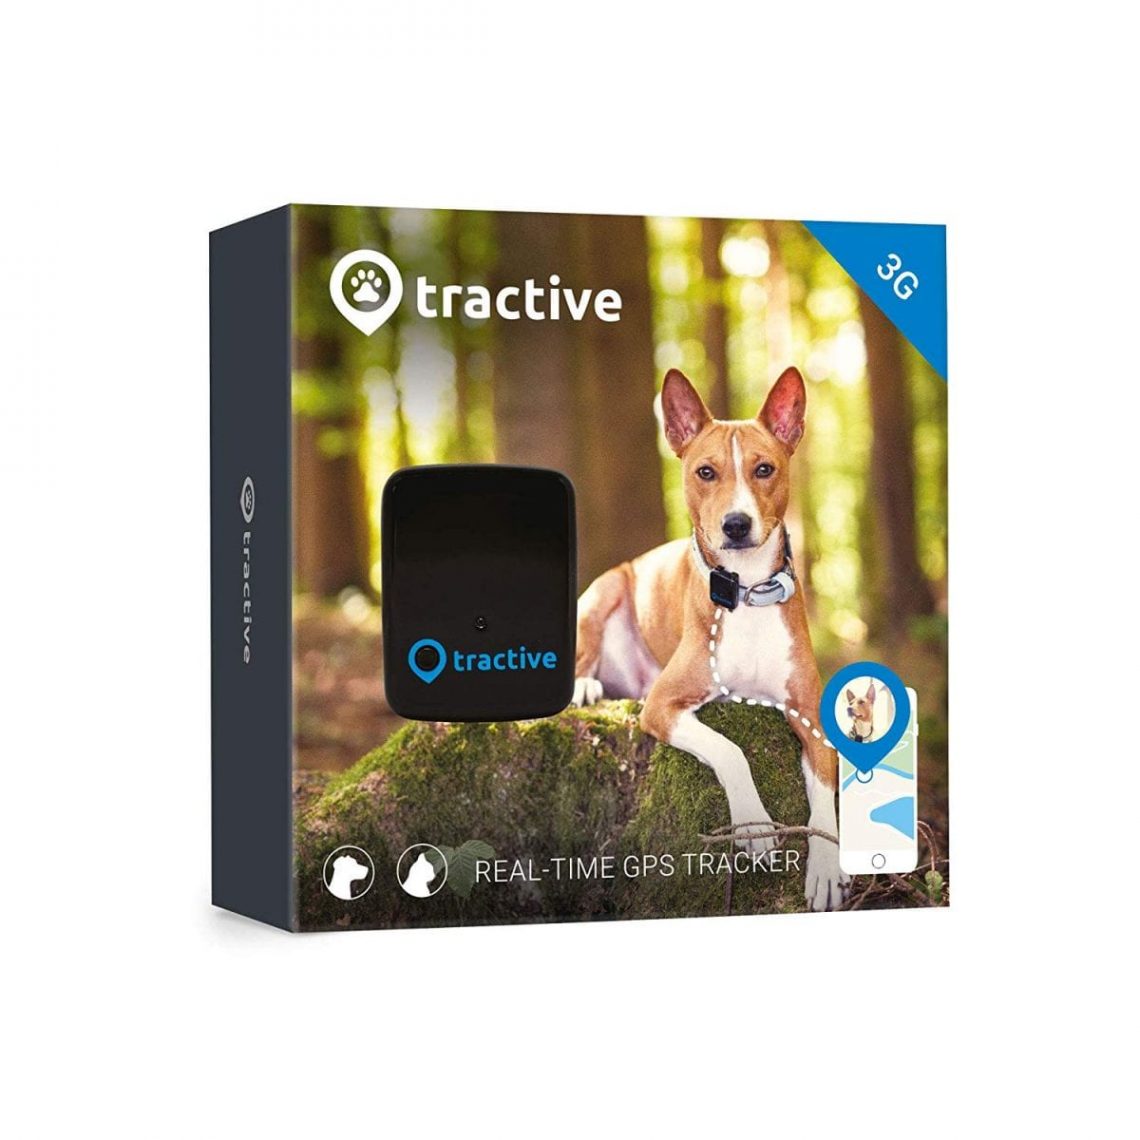 Tractive 3G Dog GPS Tracker review